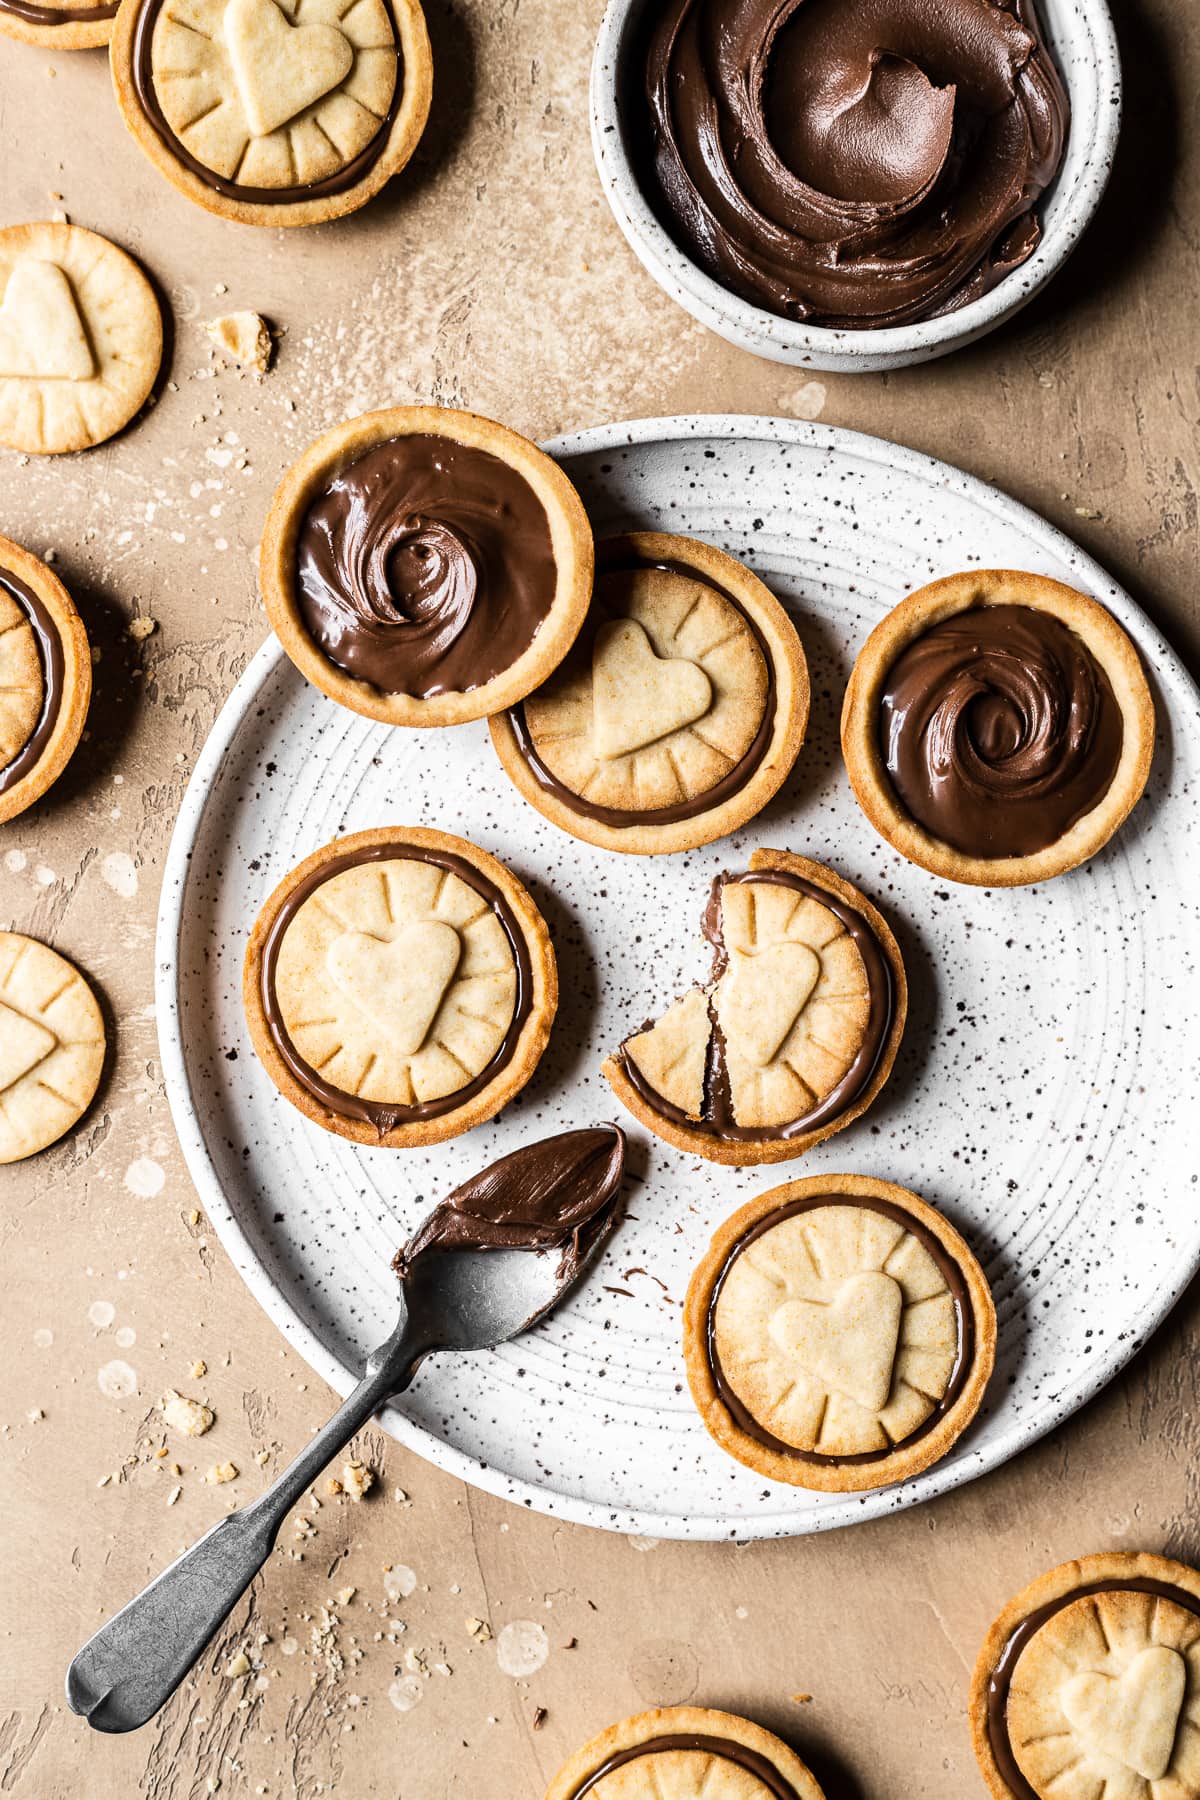 Nutella filled biscuits on a white speckled ceramic plate. A small bowl of Nutella rests nearby. A spoon of Nutella rests on the plate. The plate sits on a warm tan stone surface. More cookies and crumbs surround the plate.